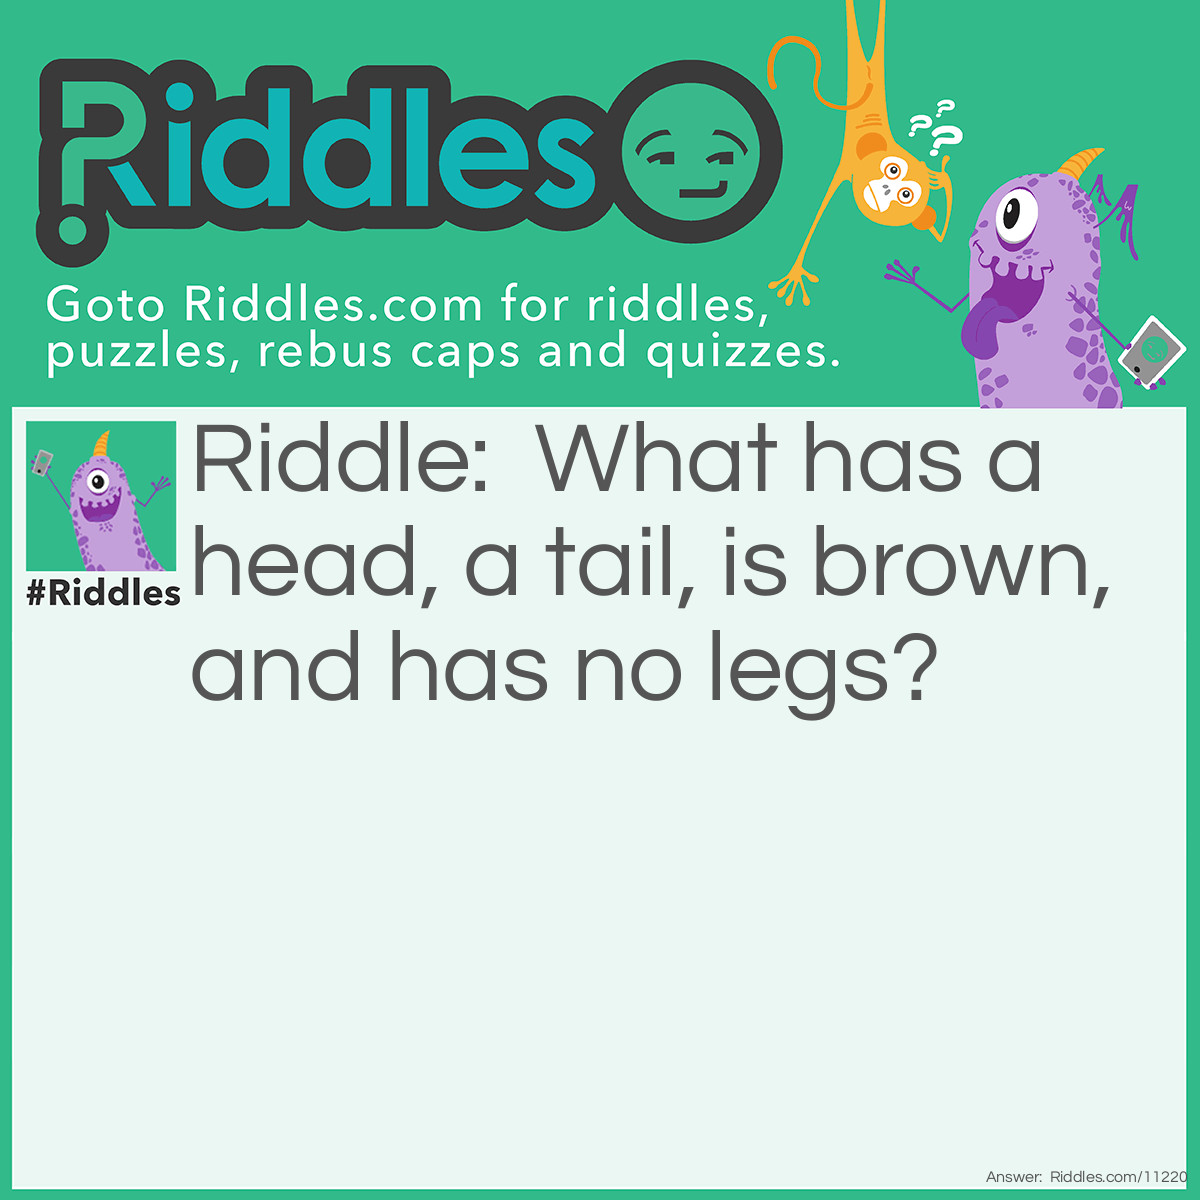 Riddle: What has a head, a tail, is brown, and has no legs? Answer: A penny.